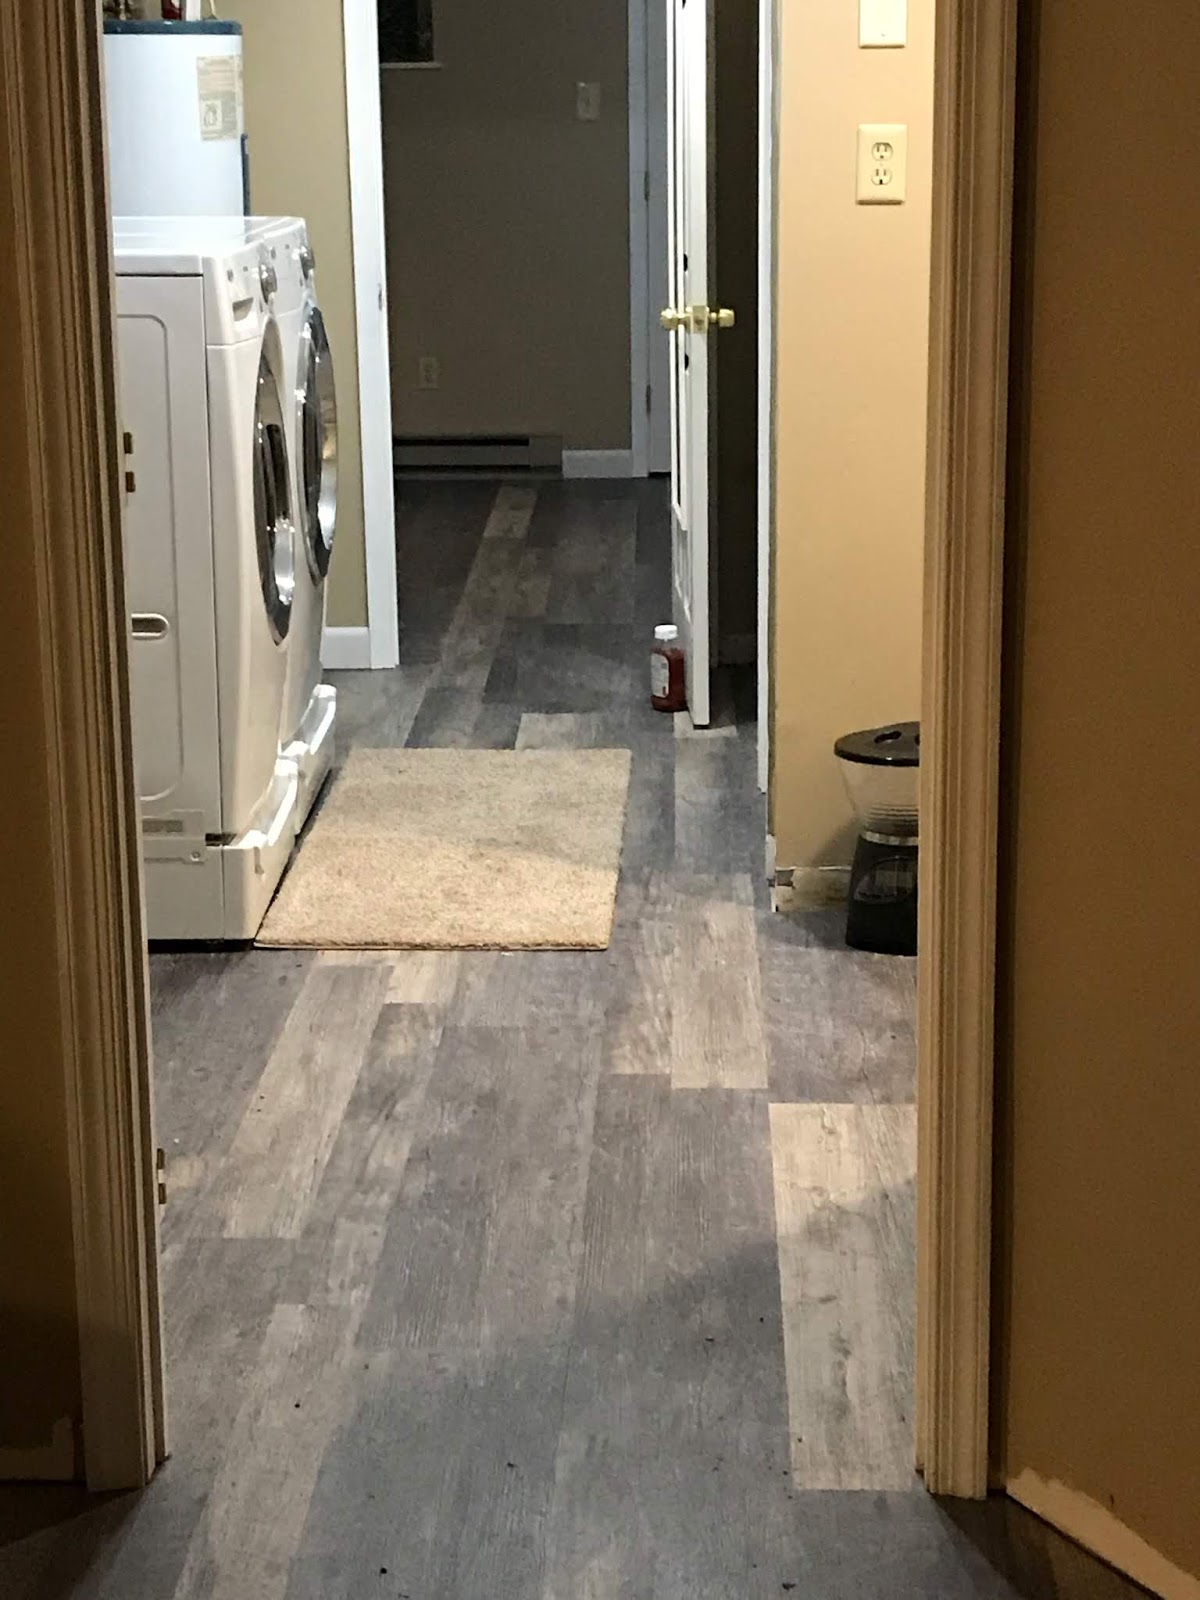 A Bob's Life: Project Update: Flooring Installed